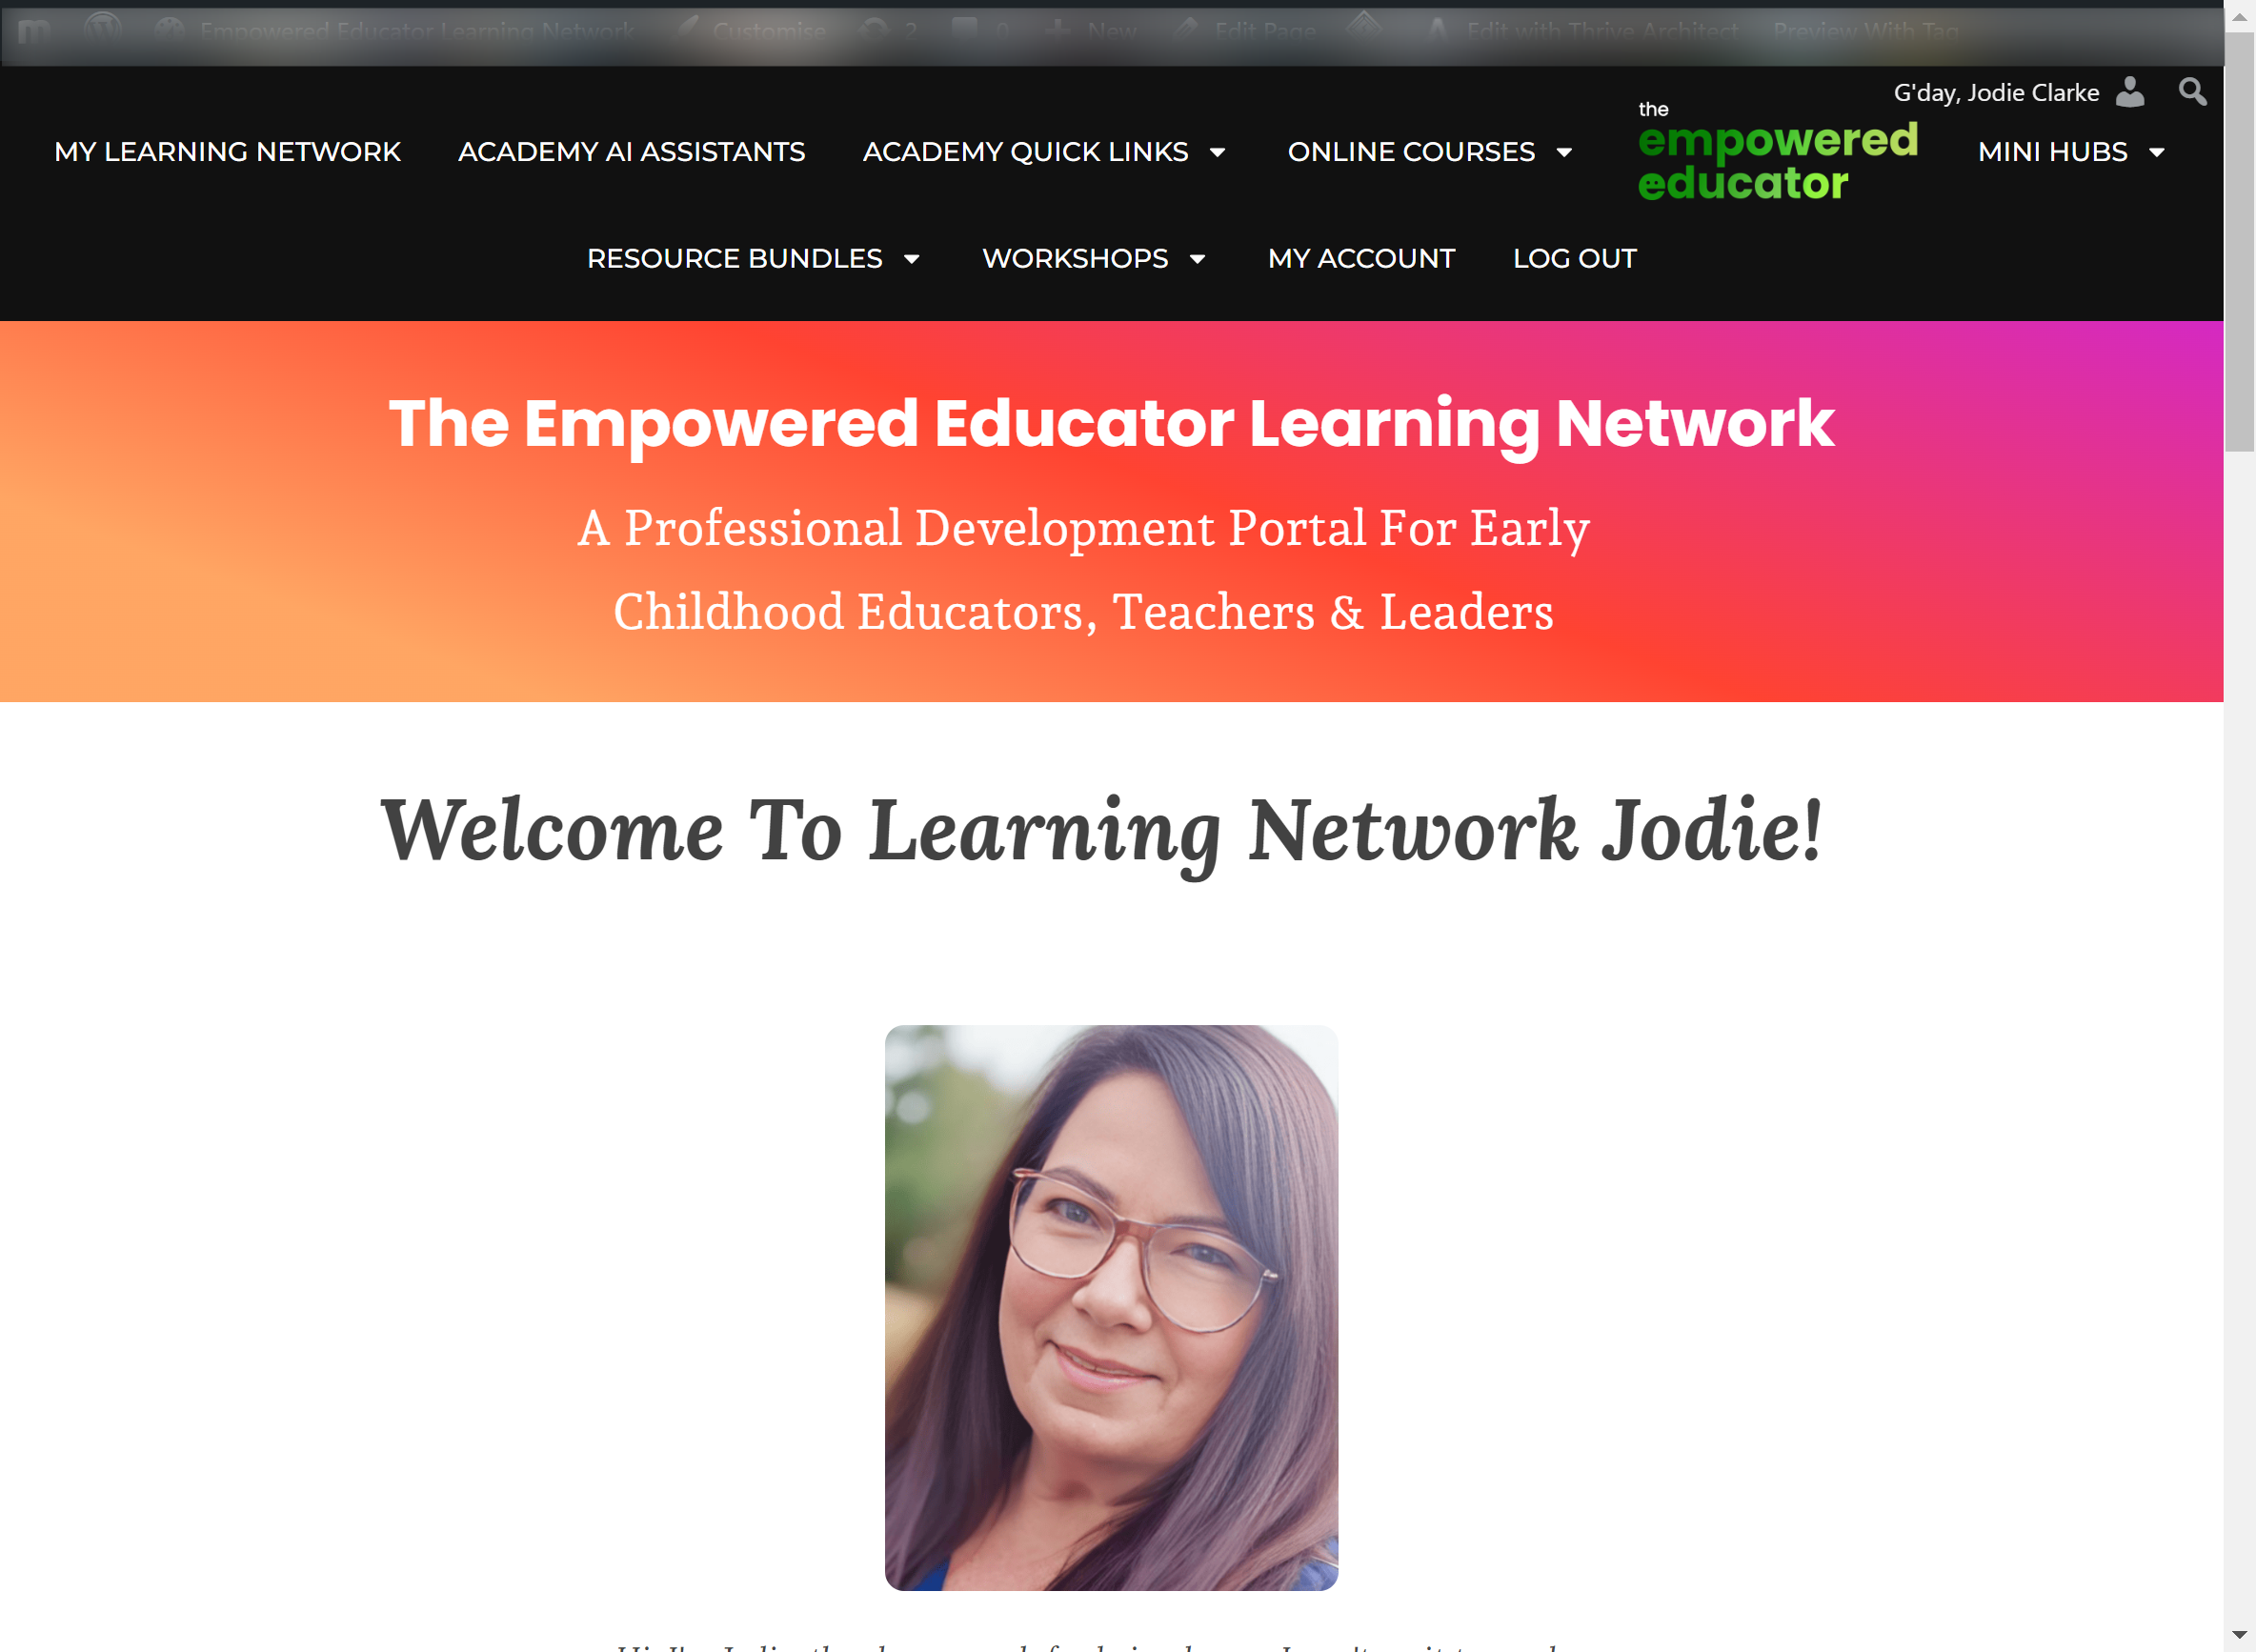 After logging in you'll come to this page which is the Learning network Homepage. Click here and I'll show you where to go next